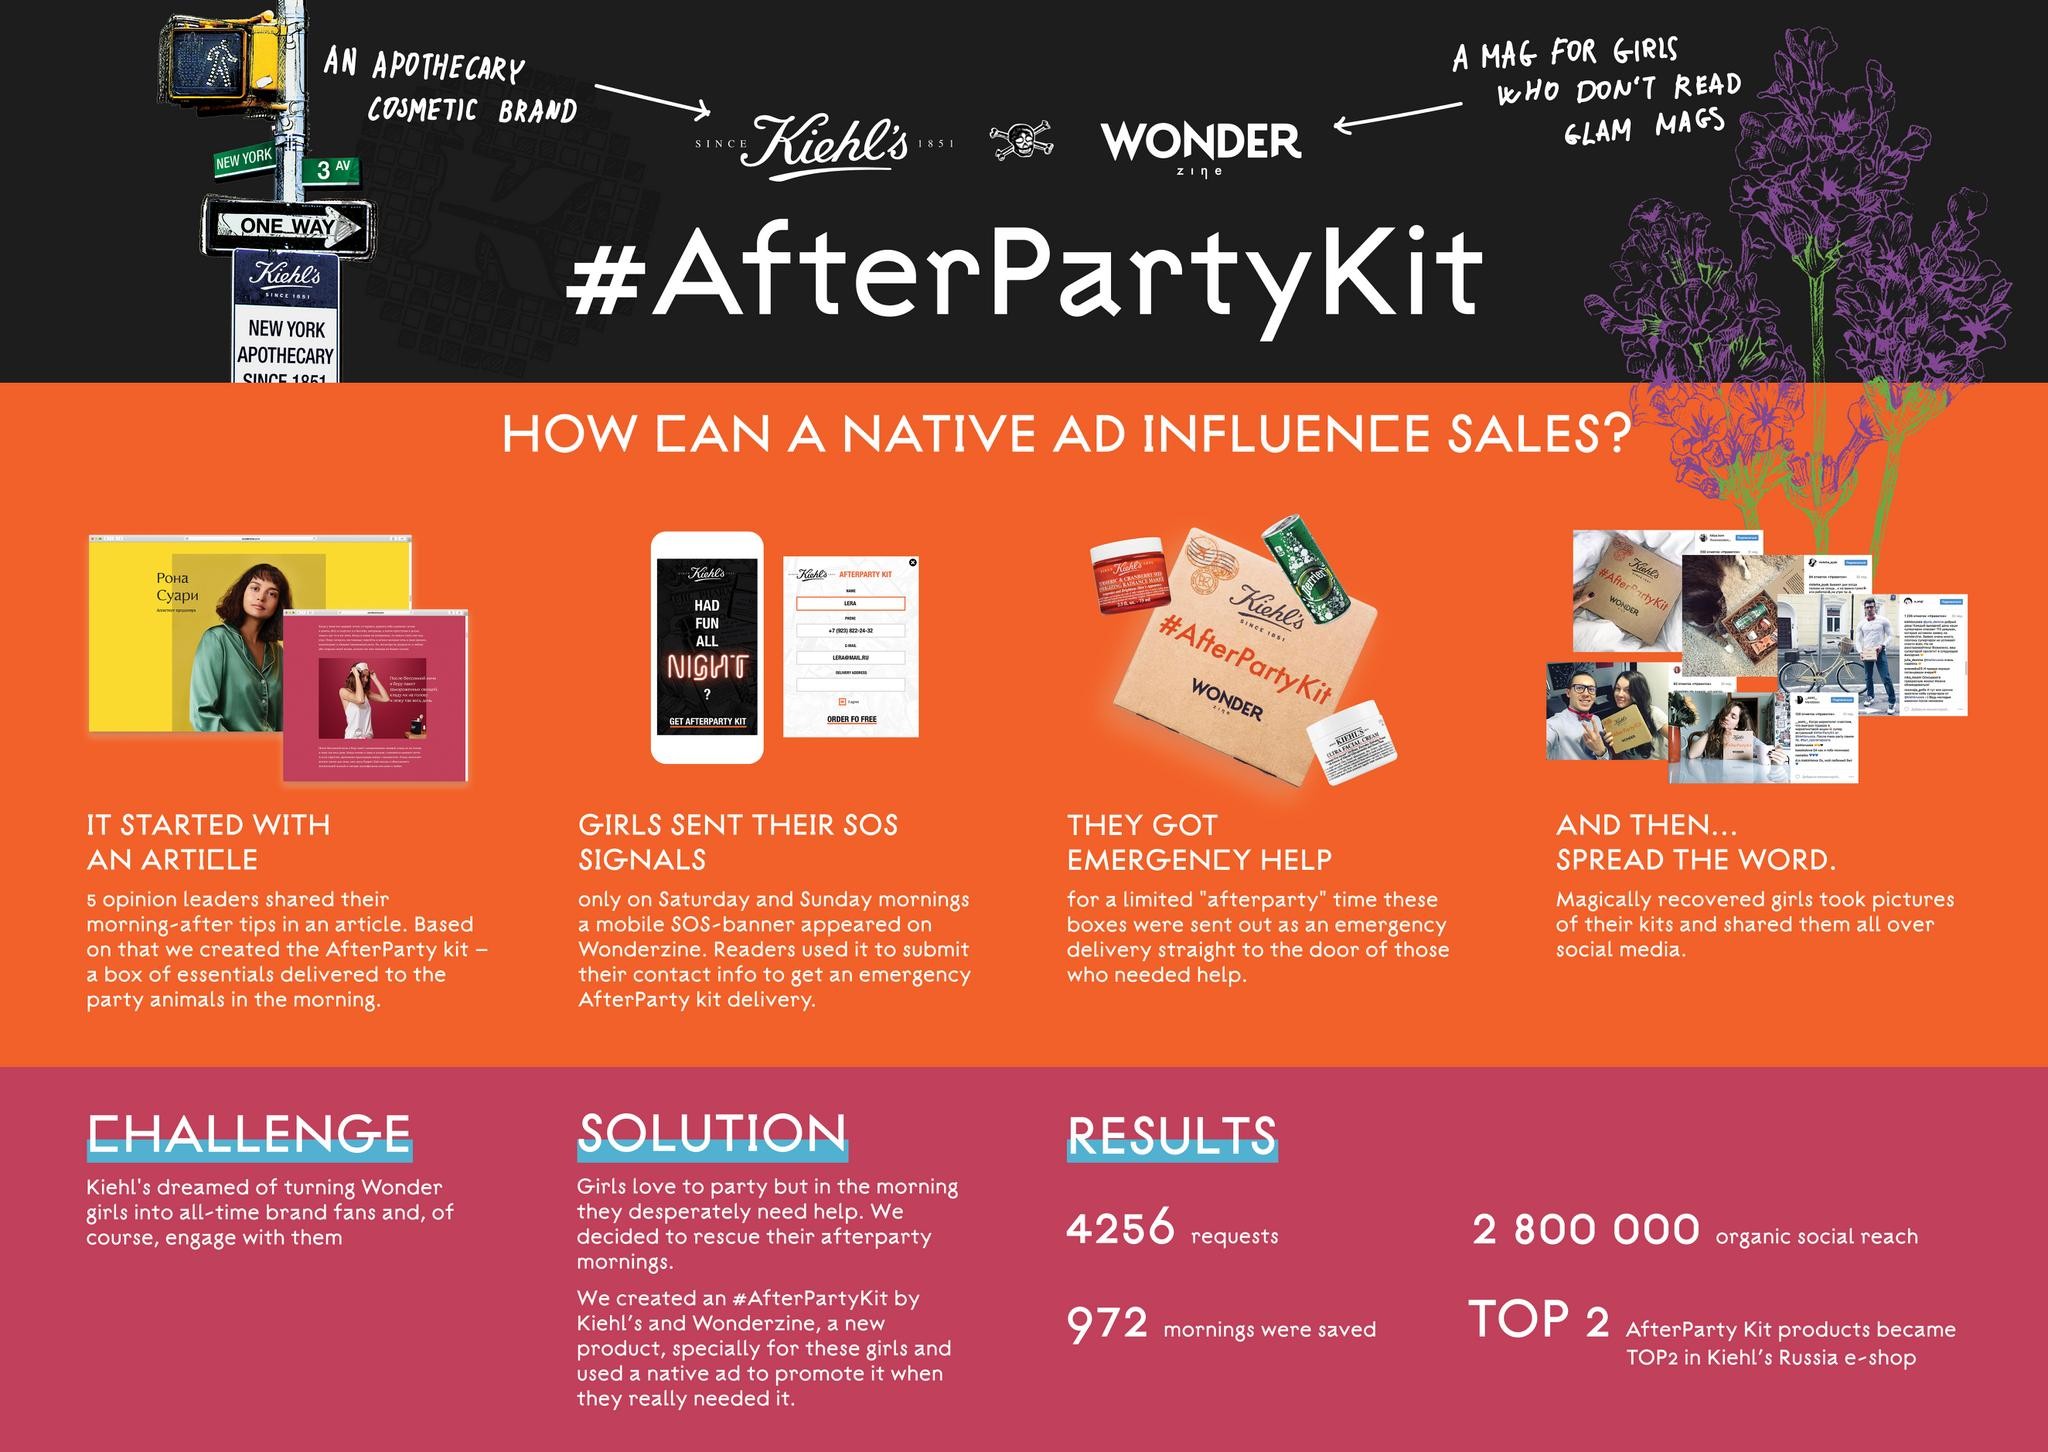 #AfterPartyKit